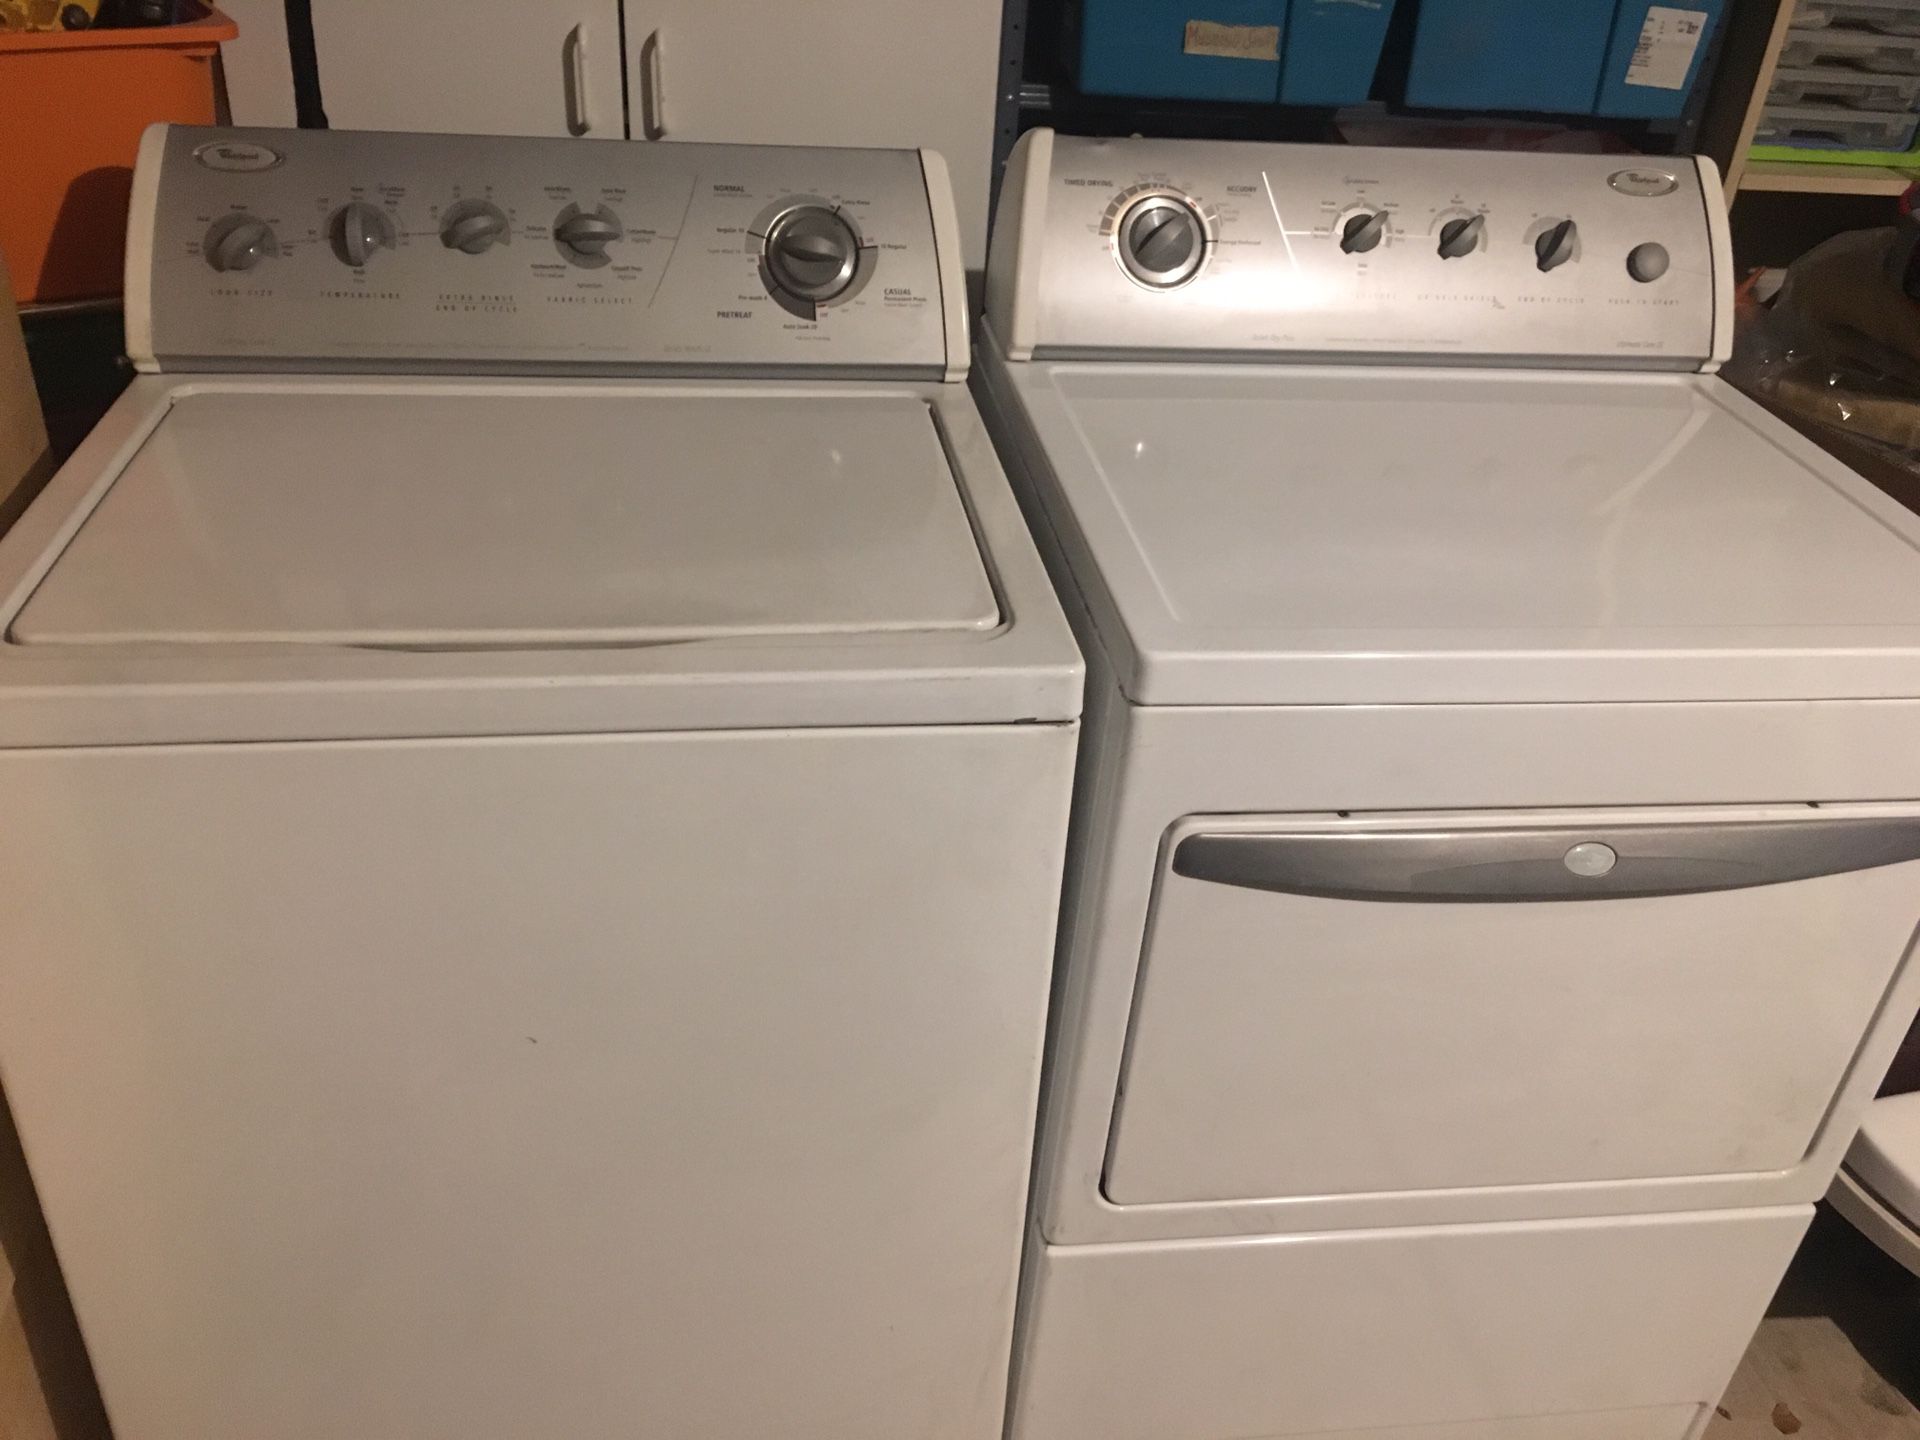 Whirlpool Gold Washer / Dryer set - Ultimate Care II